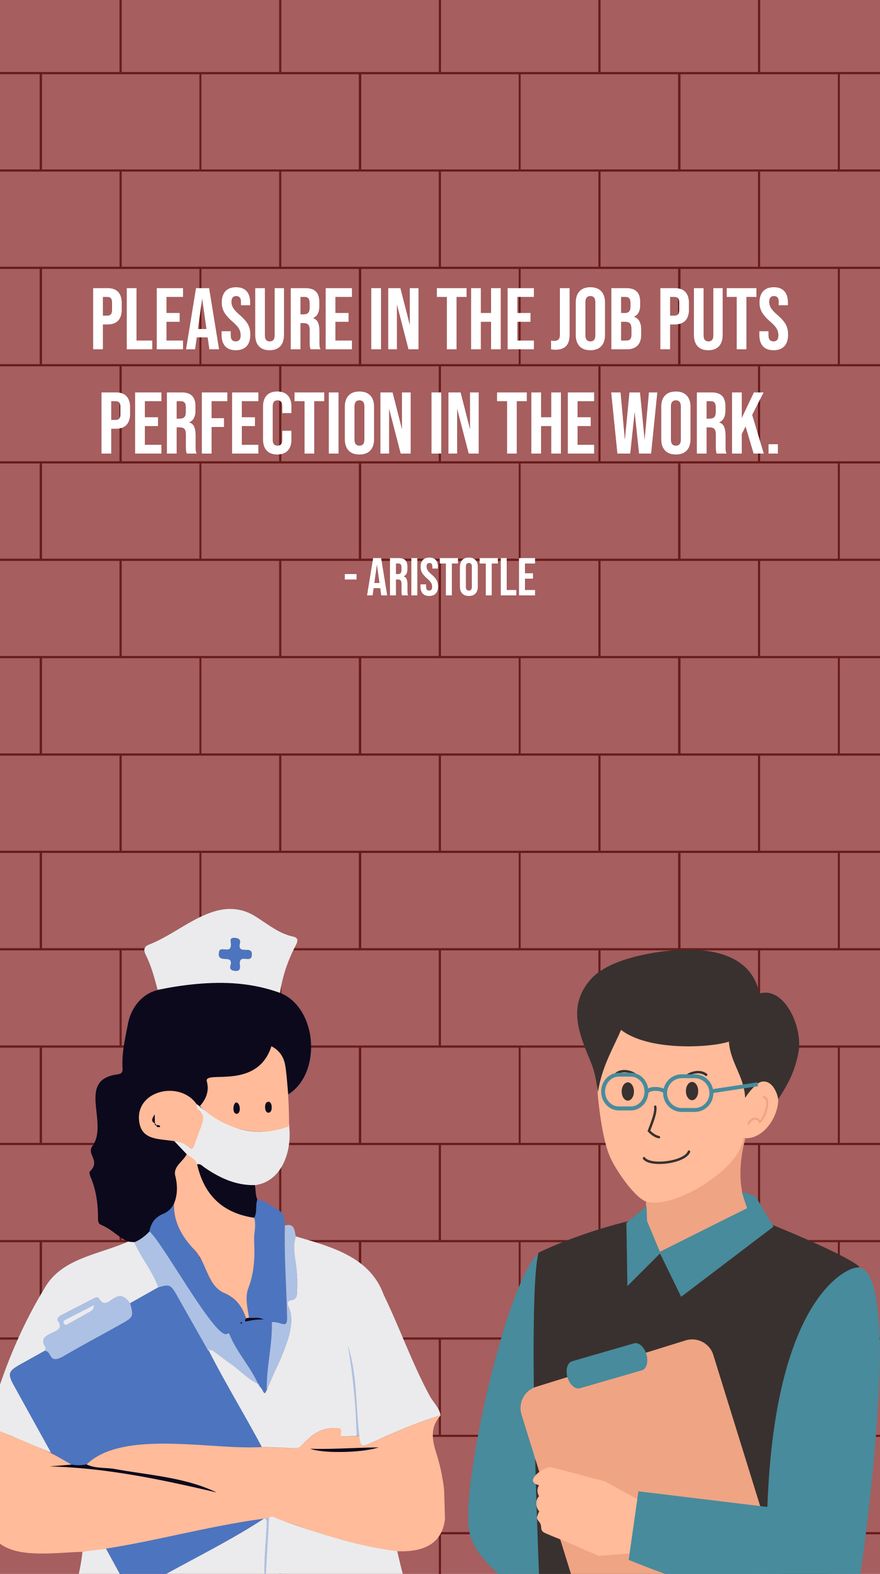 Free Aristotle - Pleasure in the job puts perfection in the work. in JPG